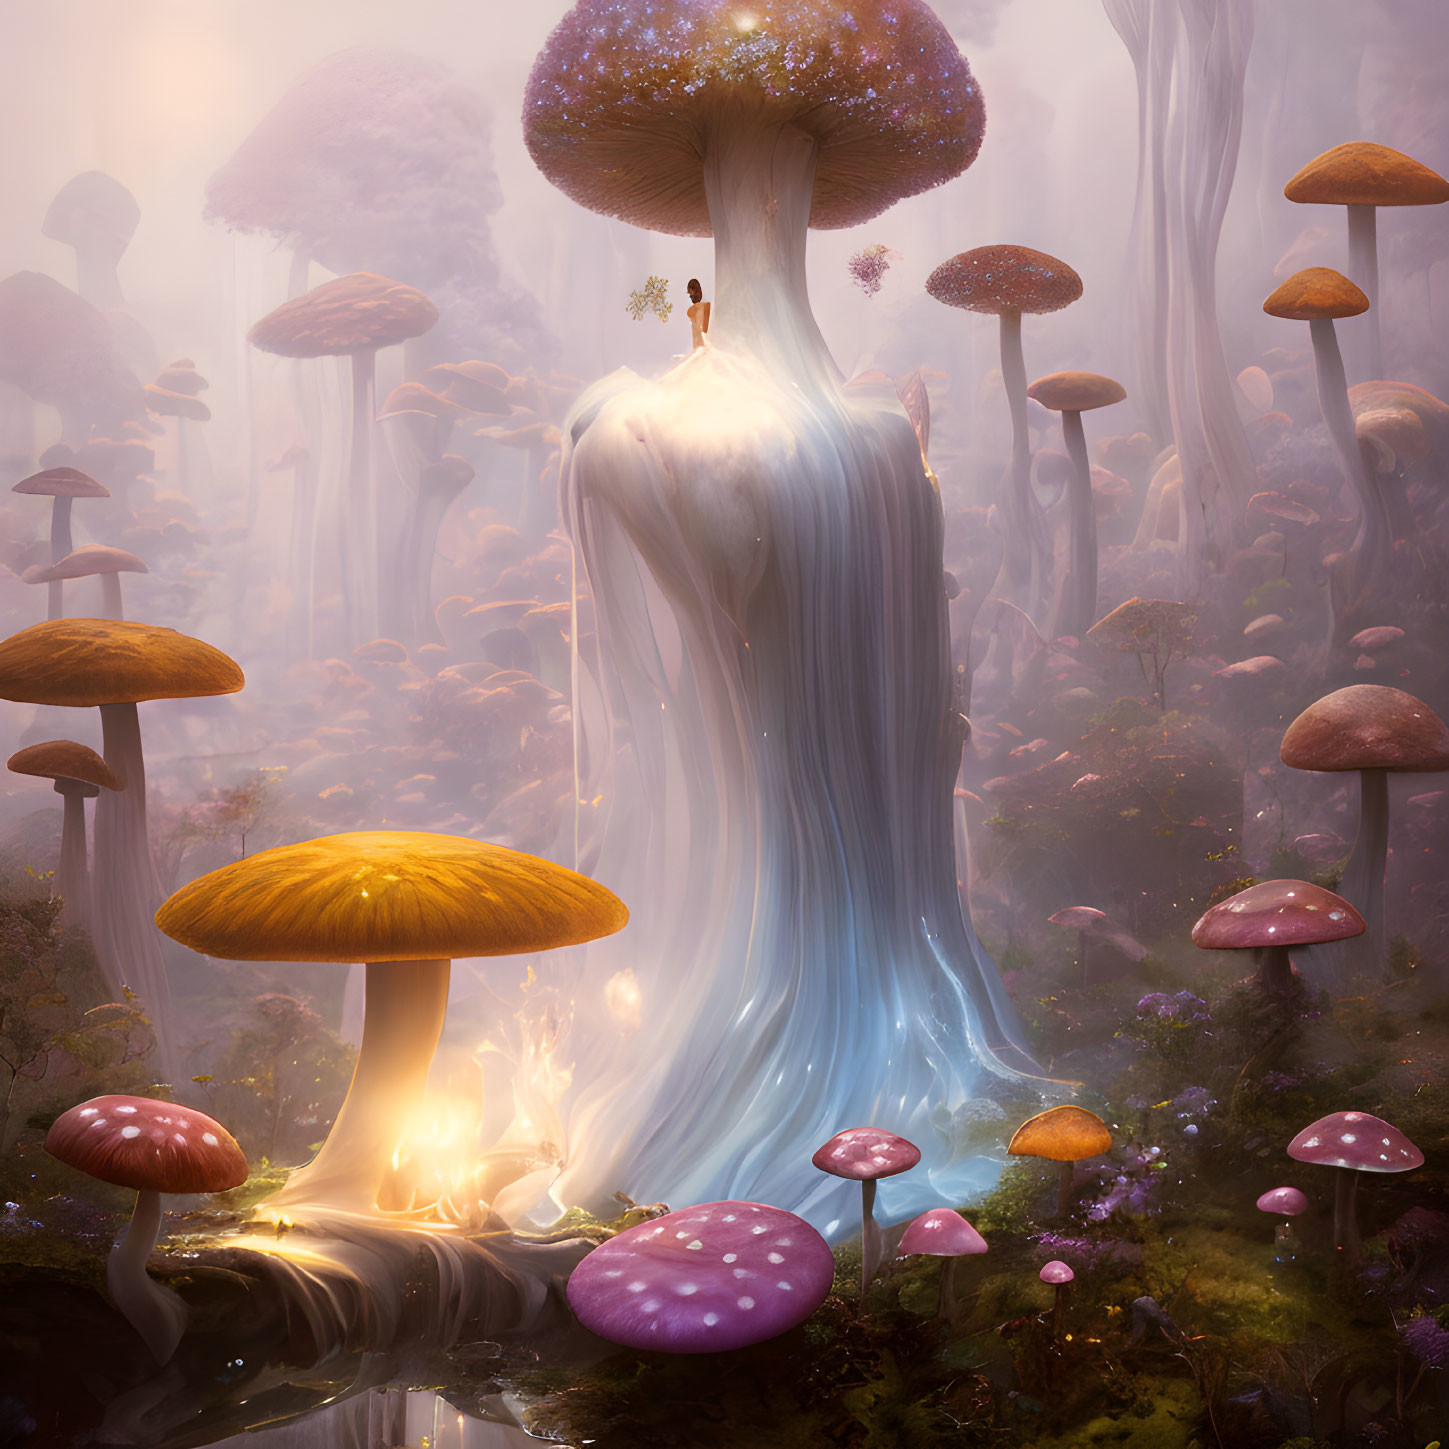 Enchanting forest scene with giant mushrooms and waterfall